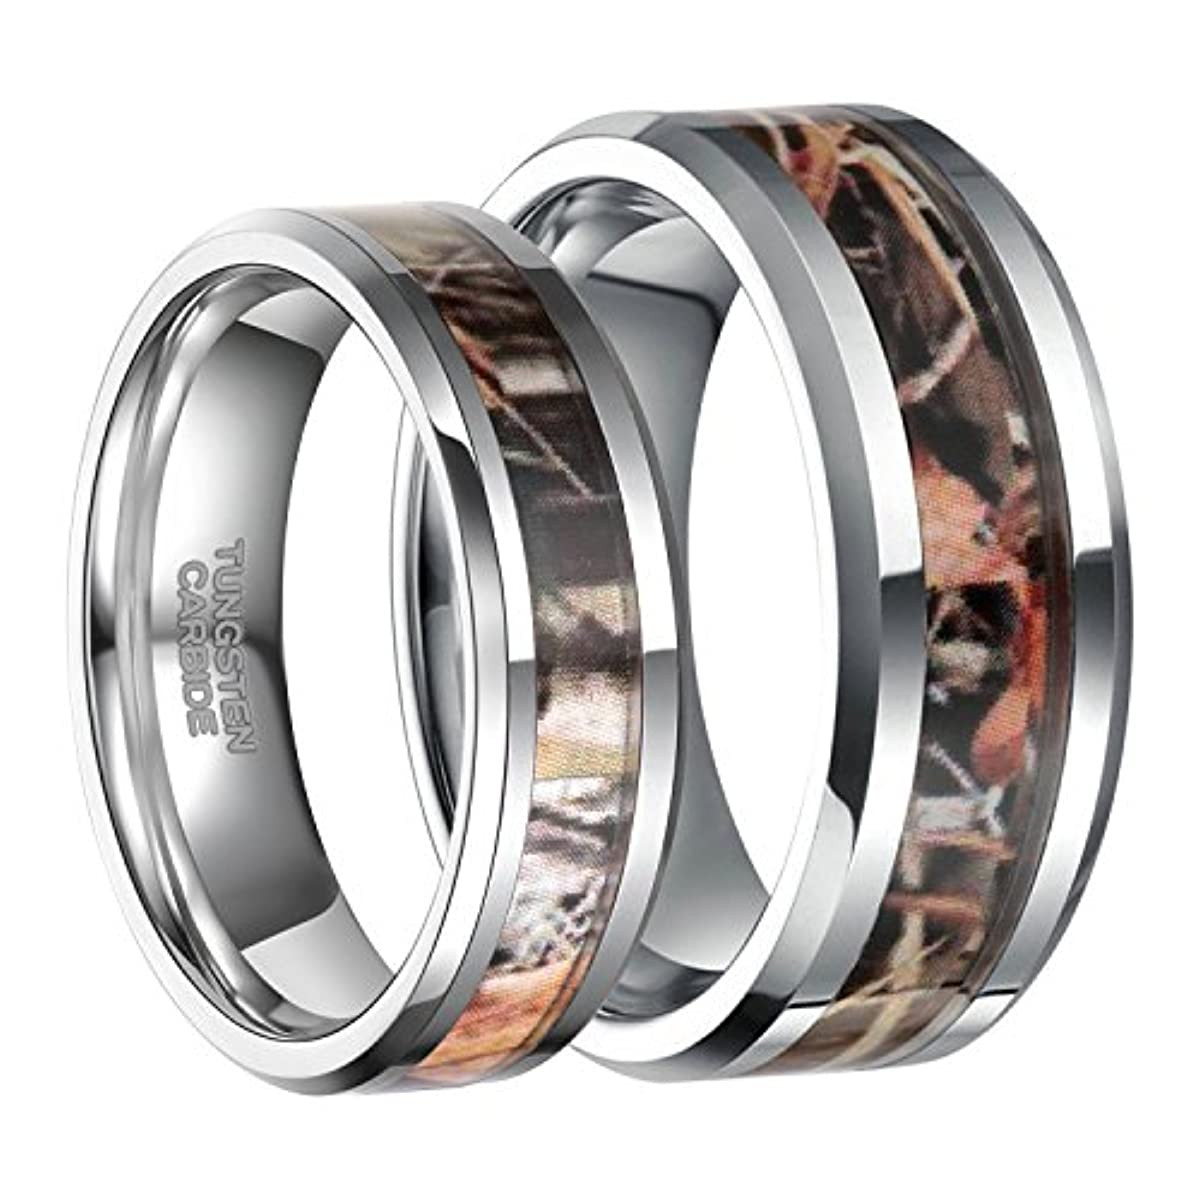 His And Her Camo Wedding Ring Sets
 His AND Her 6mm 8mm Camo Men Women Hunting Tungsten